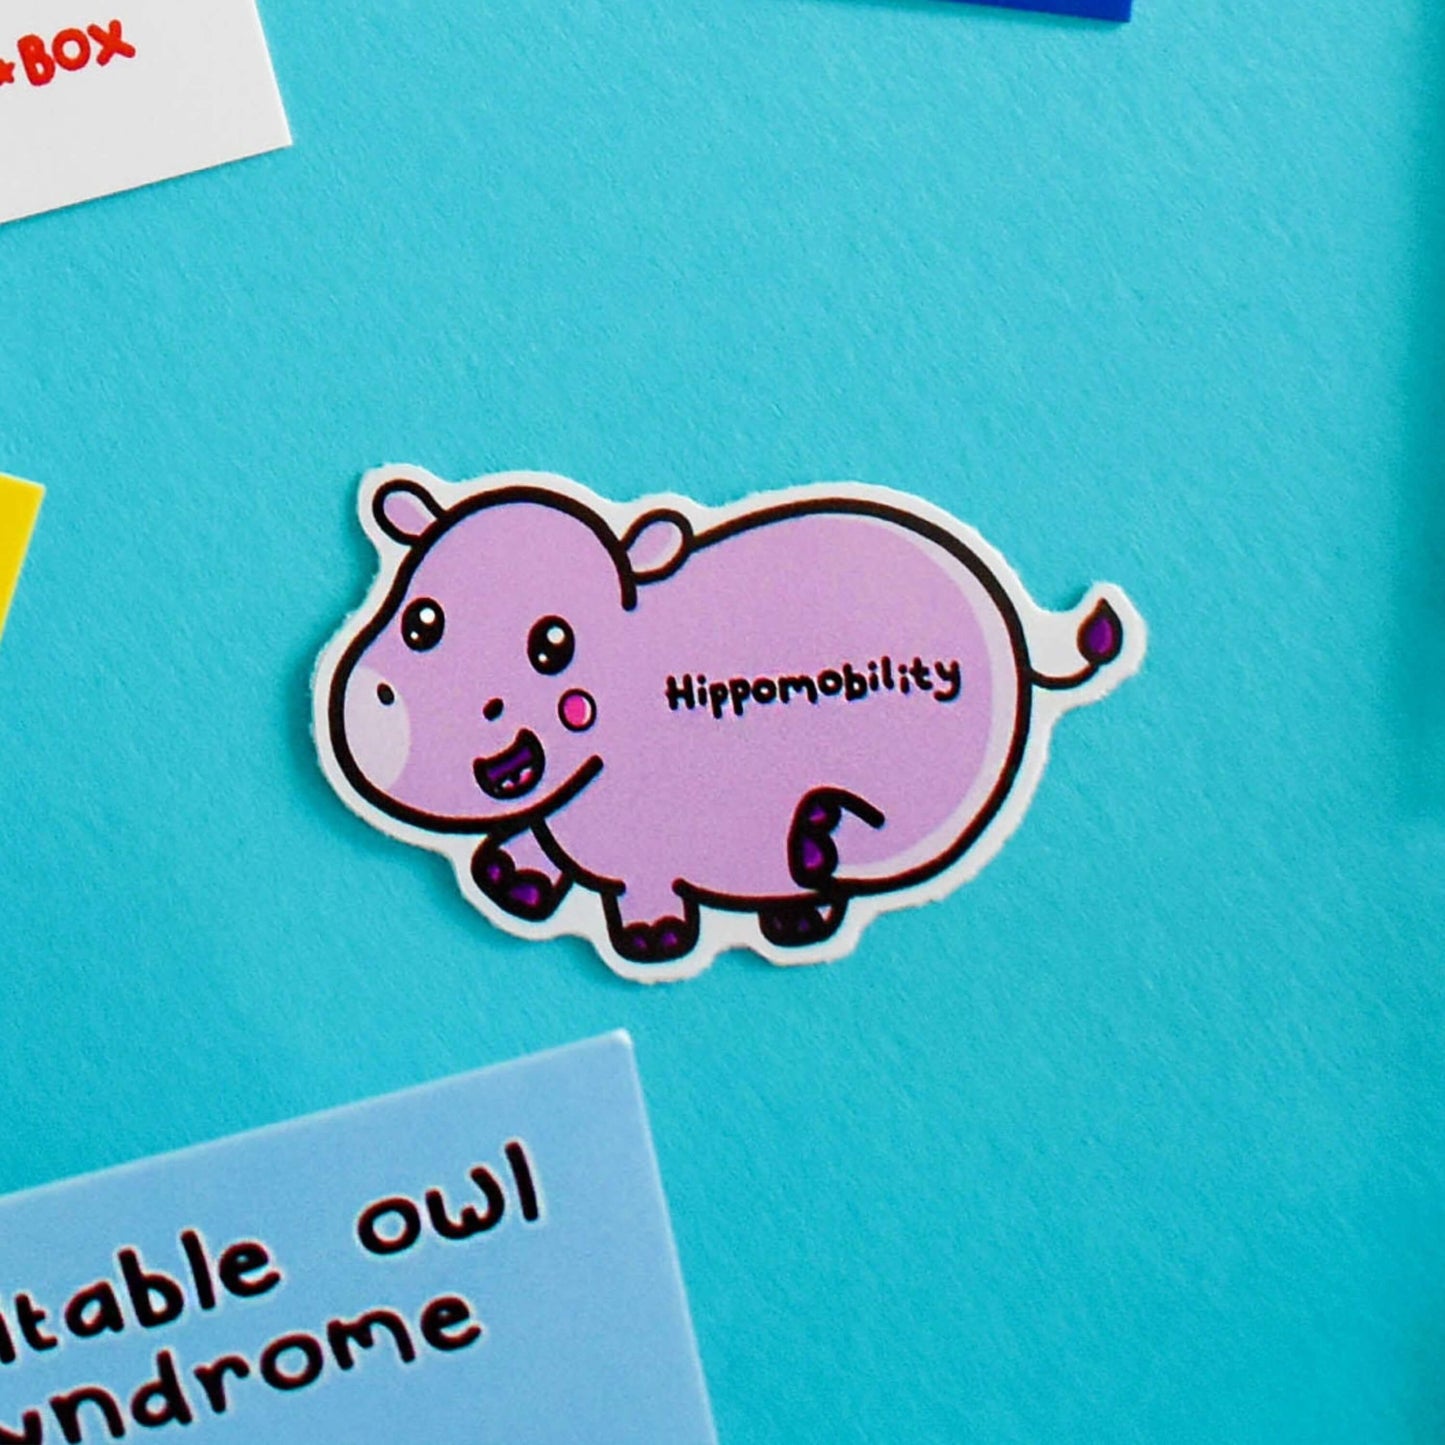 Hippomobility Sticker - Hyper Mobility on a blue background with other innabox products. A cute smiling pastel purple hippo flicking its back leg up with black text reading 'hippomobility' across its body. The hand drawn design is raising awareness for hyper mobility and EDS.